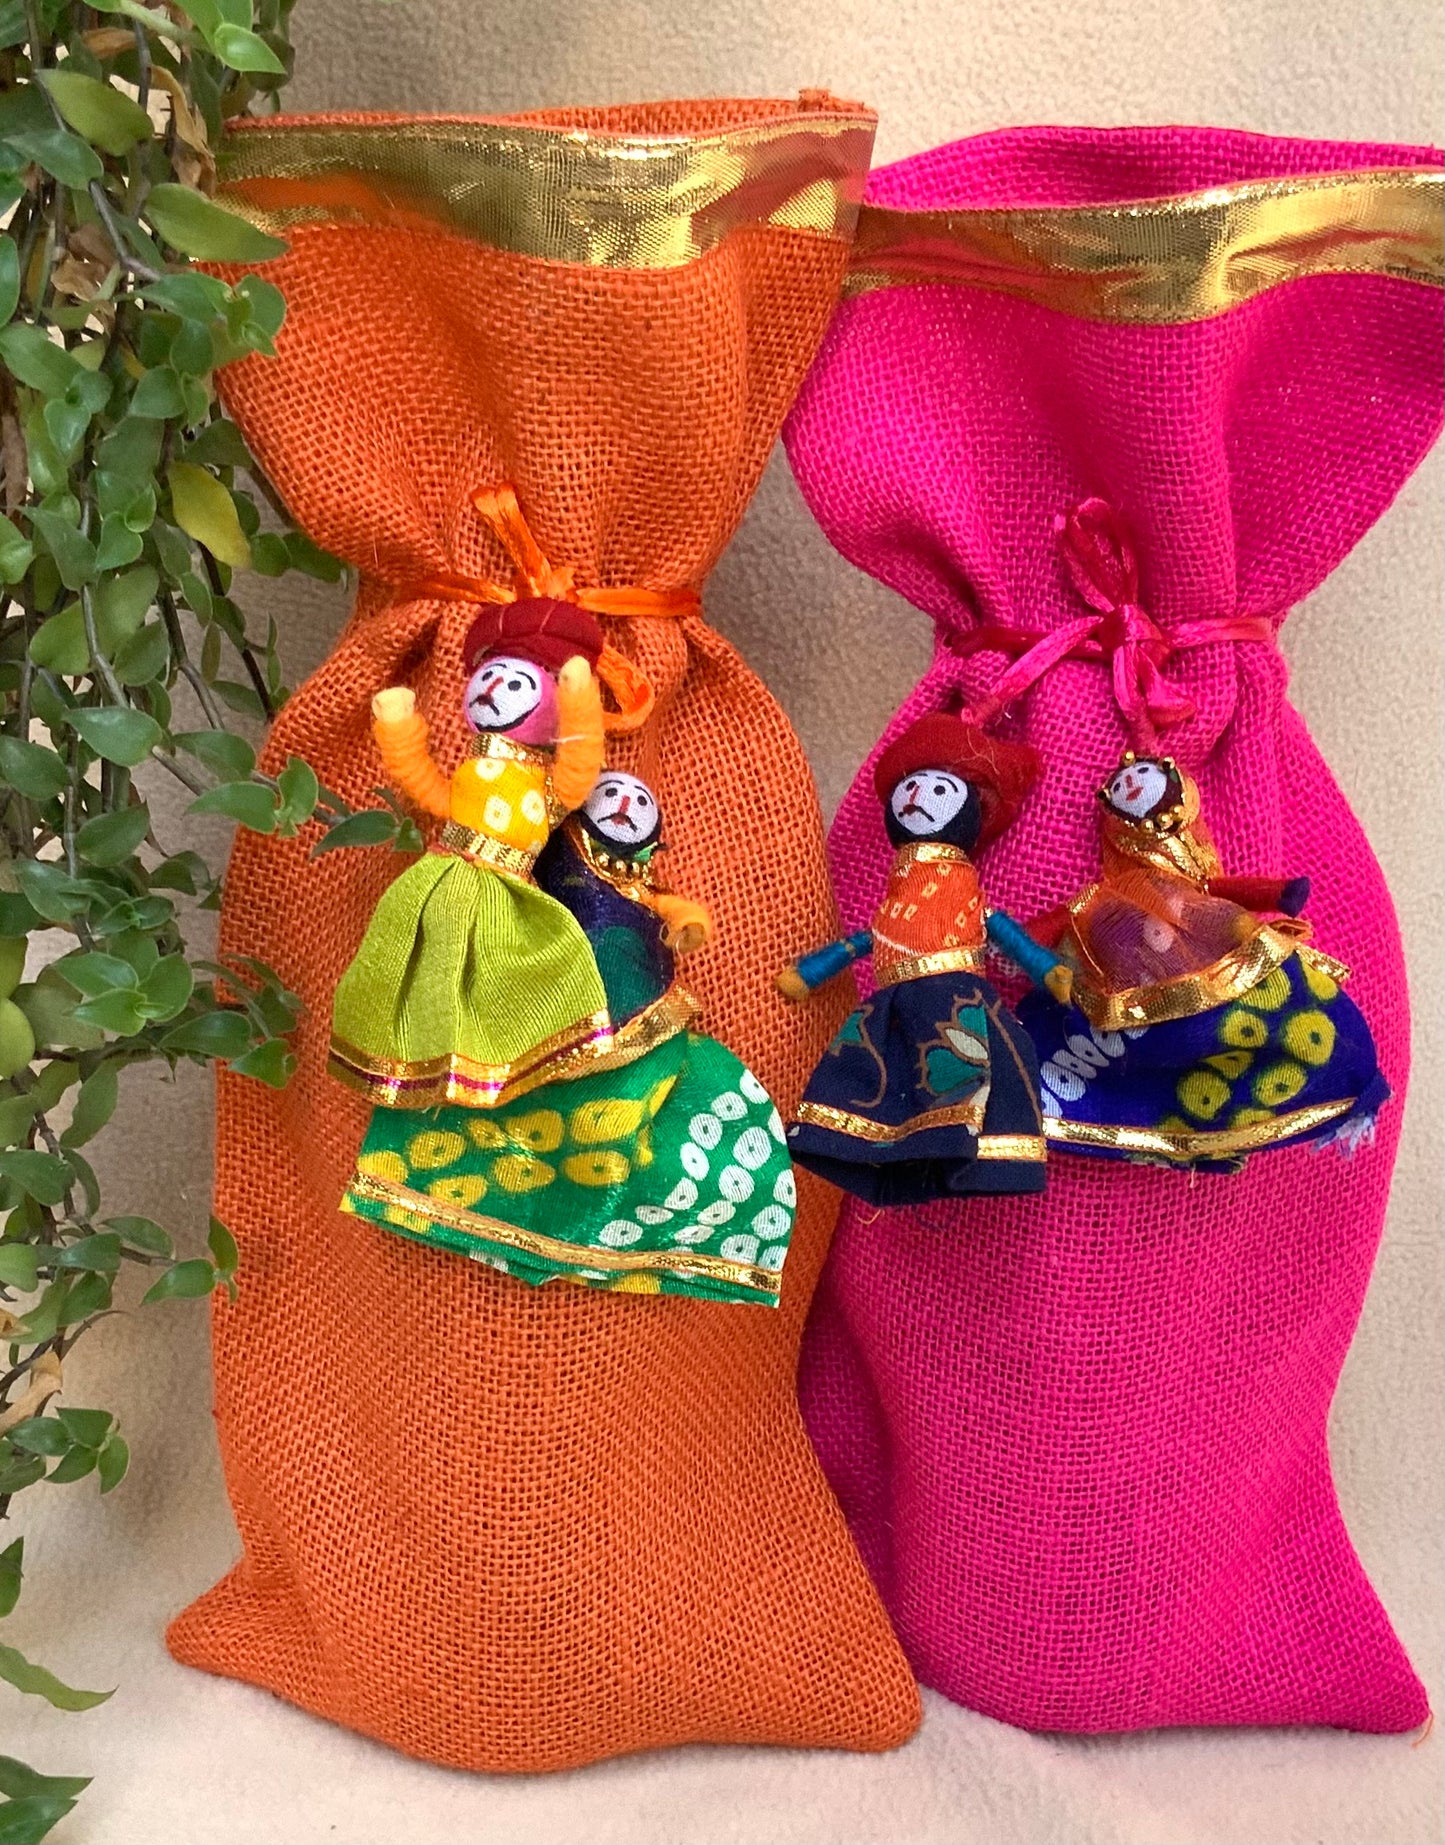 Puppet bags